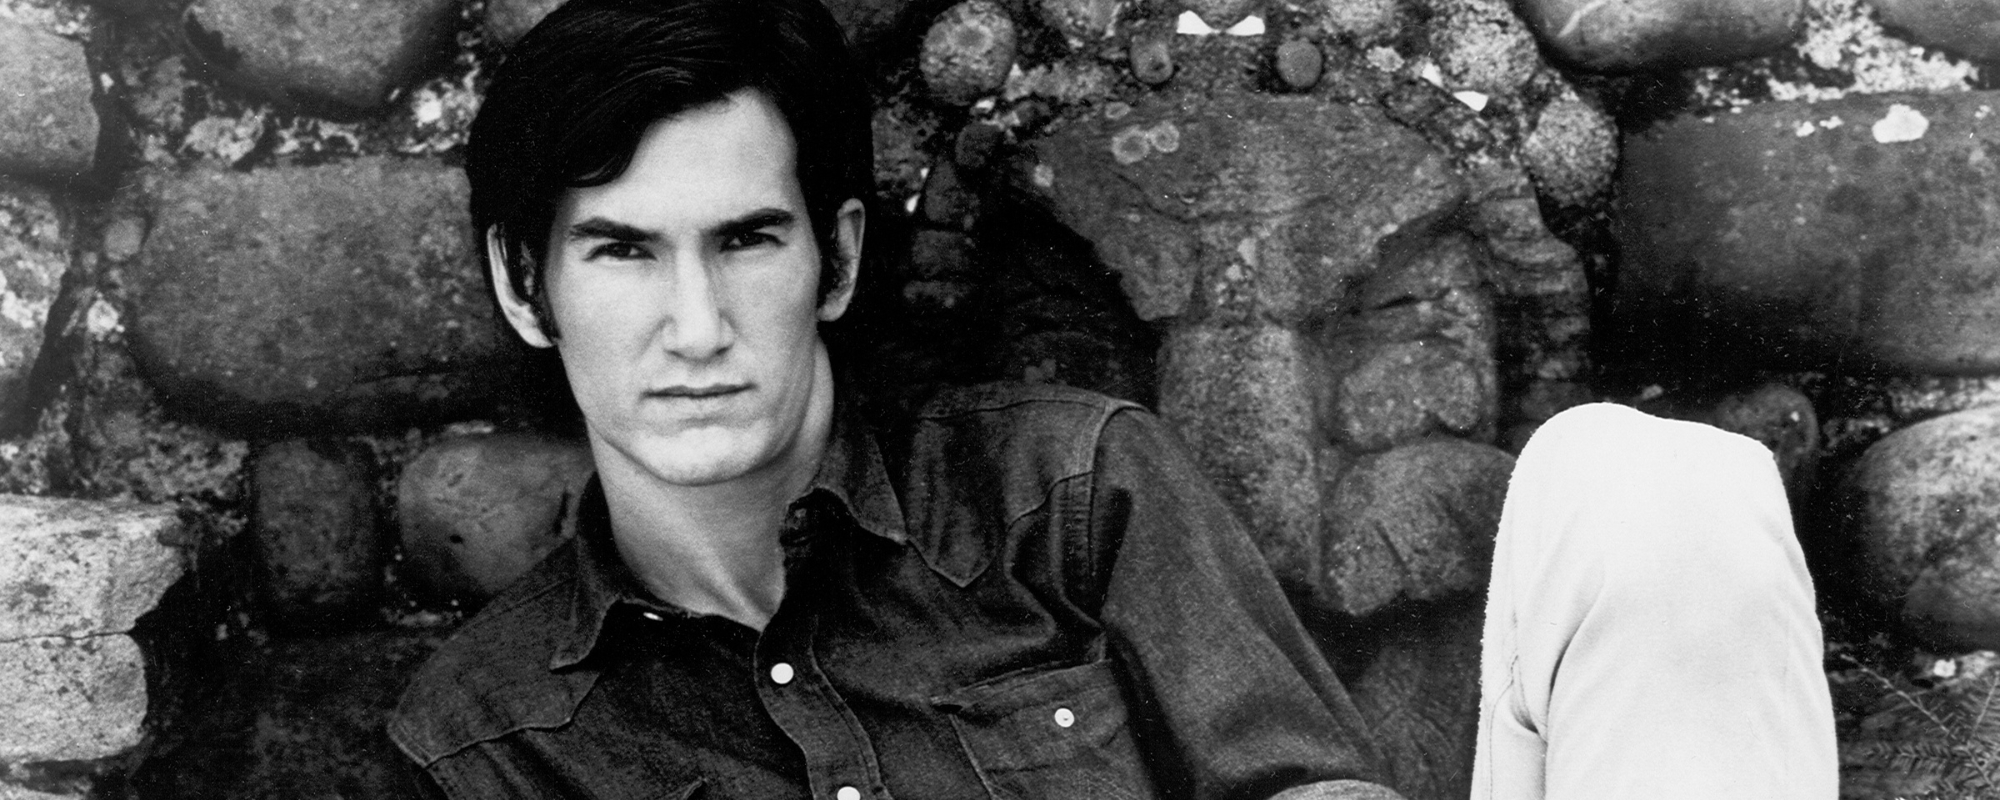 The Stomach Turning Backstory to Townes Van Zandt’s “Fraternity Blues”